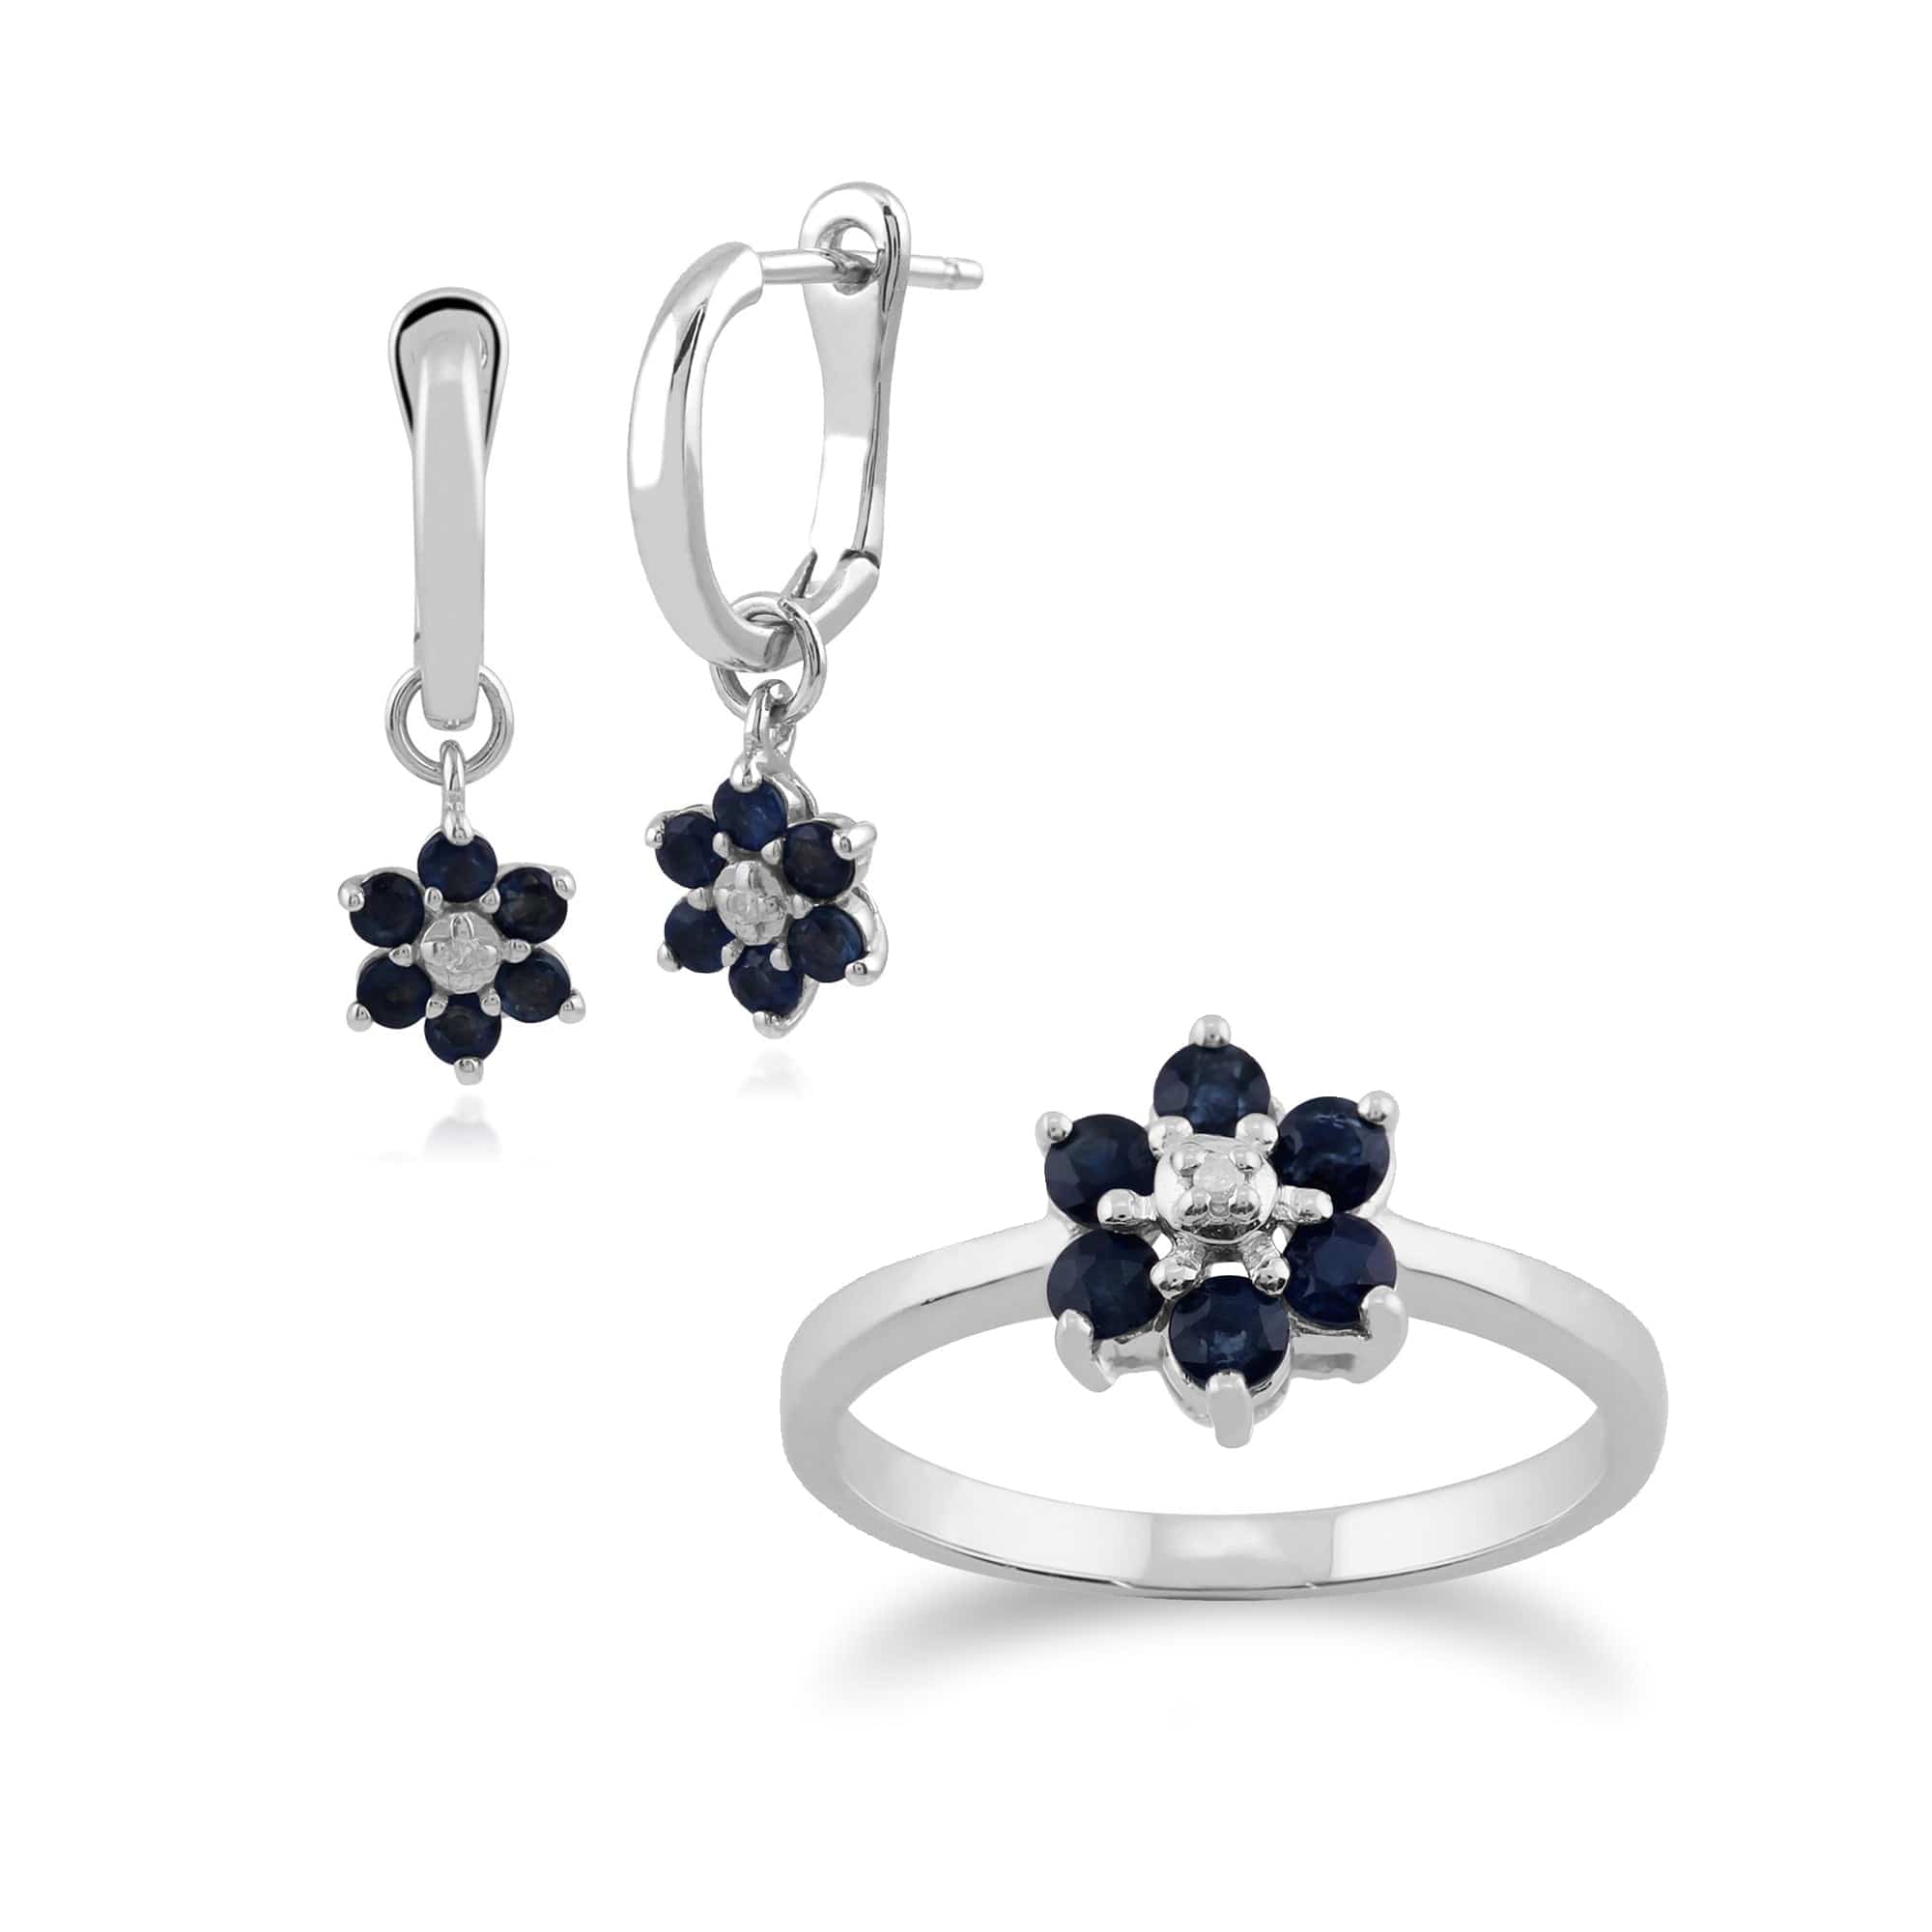 162E0239039-117R0051039 Floral Round Sapphire & Diamond Flower Drop Earrings & Ring Set in 9ct White Gold 1